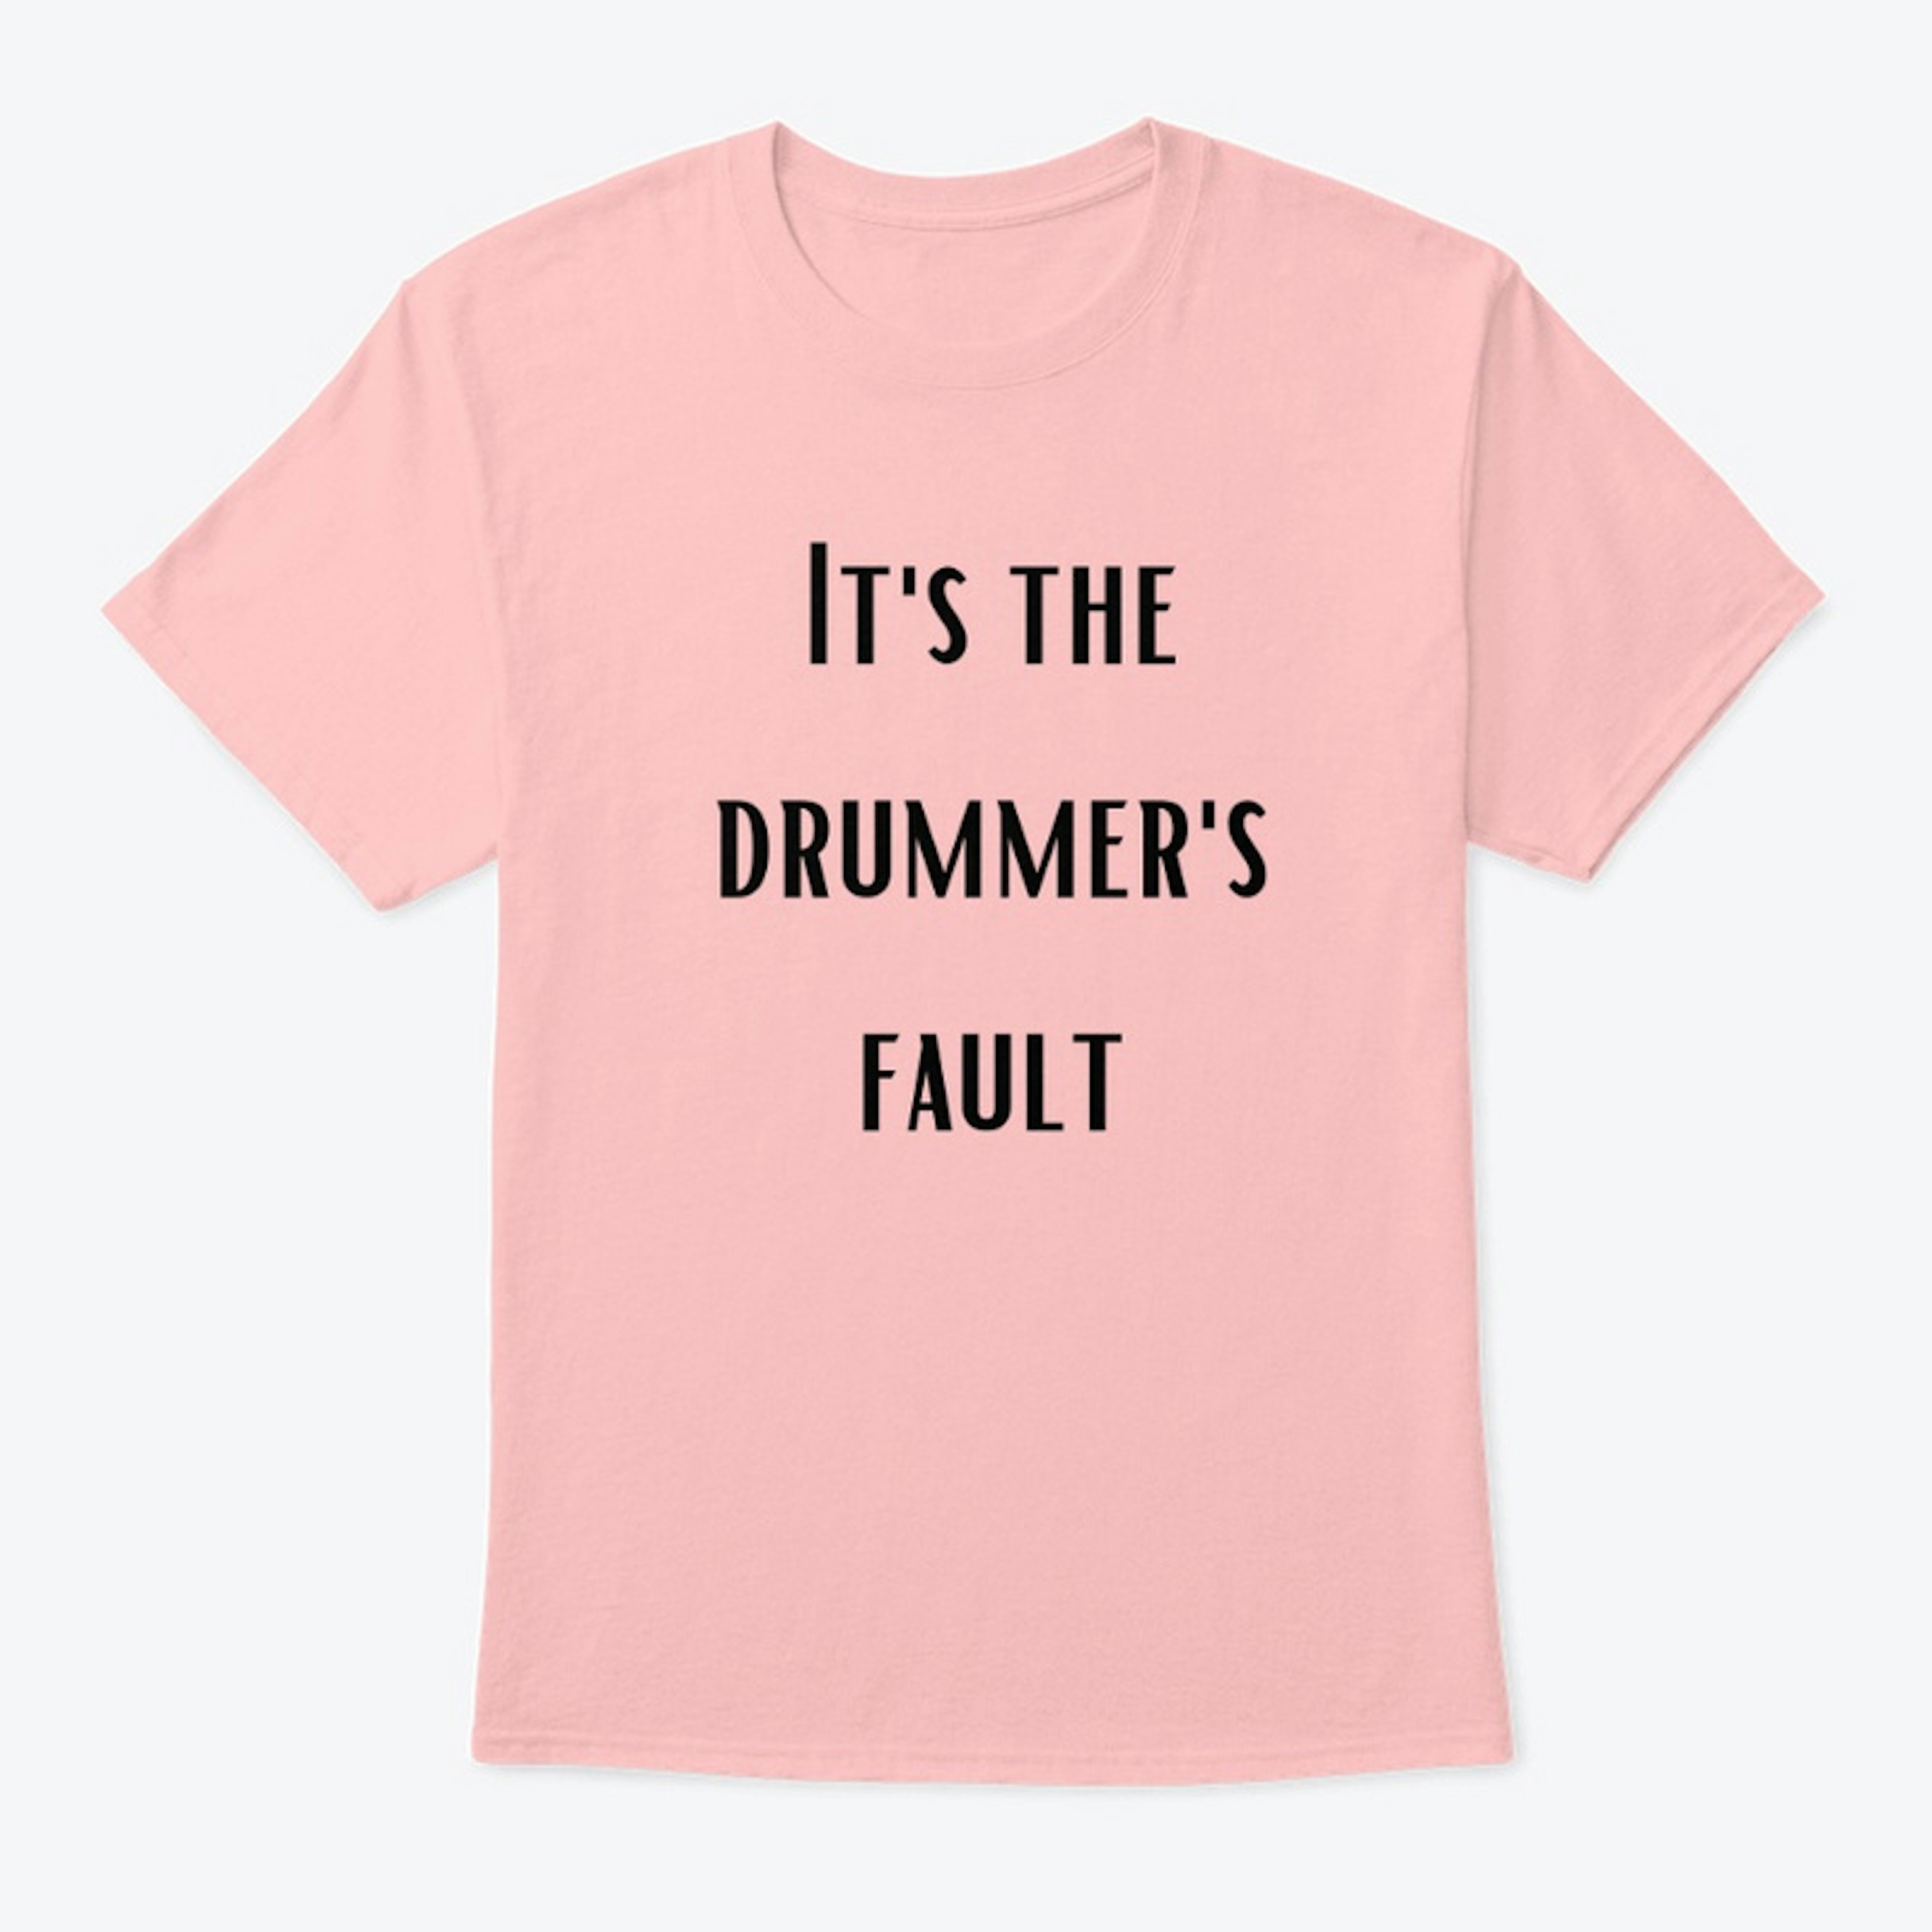 It's the drummer's fault tee